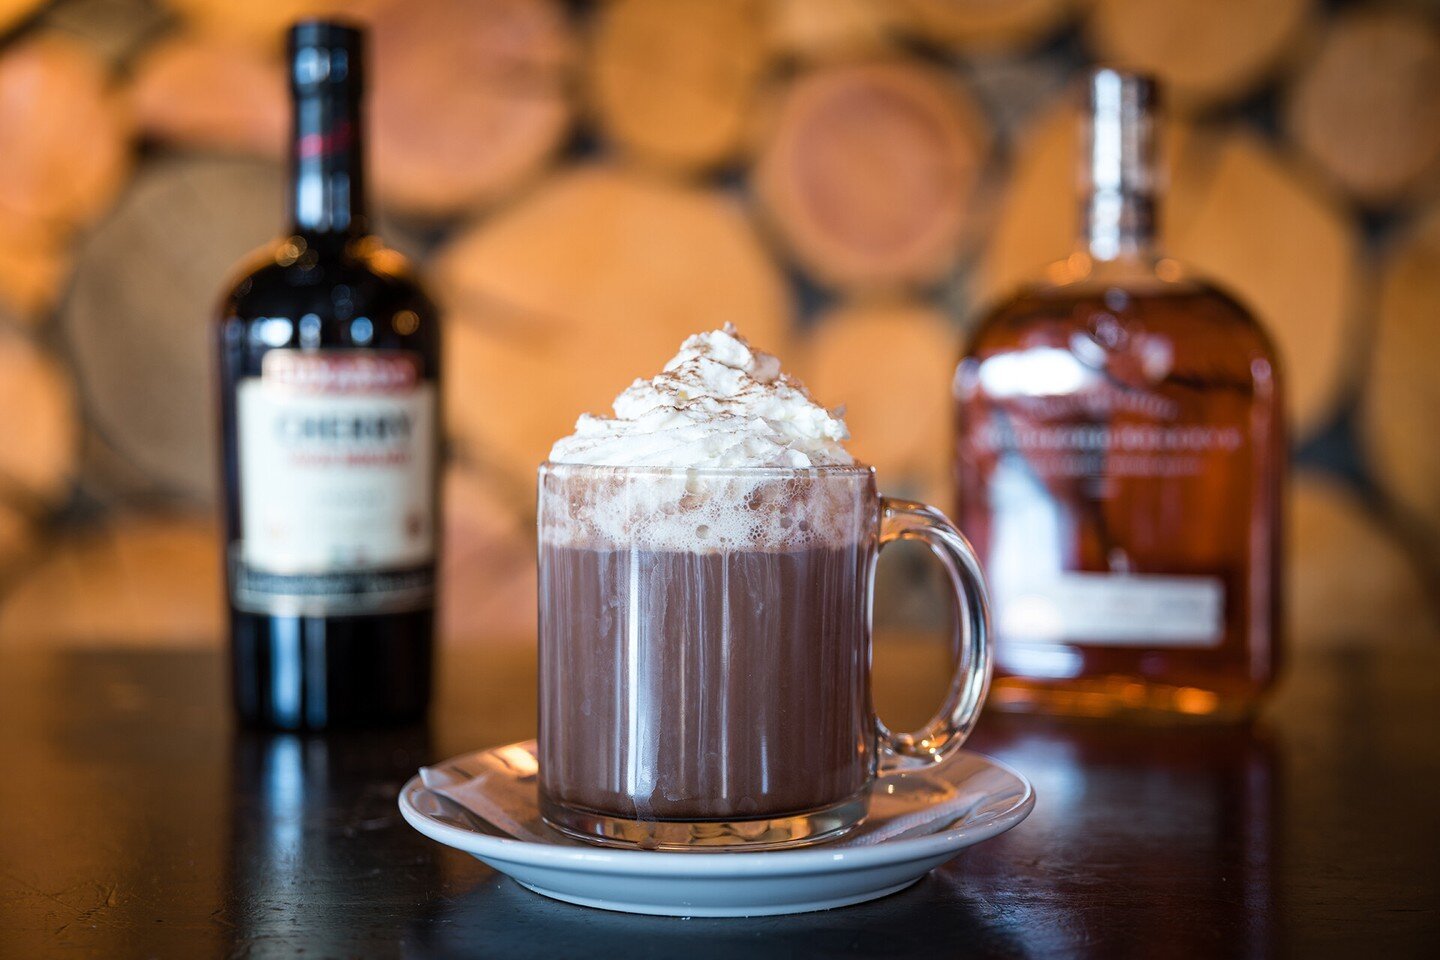 Stop by The Maple Leaf on Banff&rsquo;s 2022 Hot Chocolate Trail!
Whether you&rsquo;re a kid at heart or are visiting Banff with kids of your own, sipping on a steaming cup of hot chocolate is a must this Christmas season! Stop by anytime before Janu